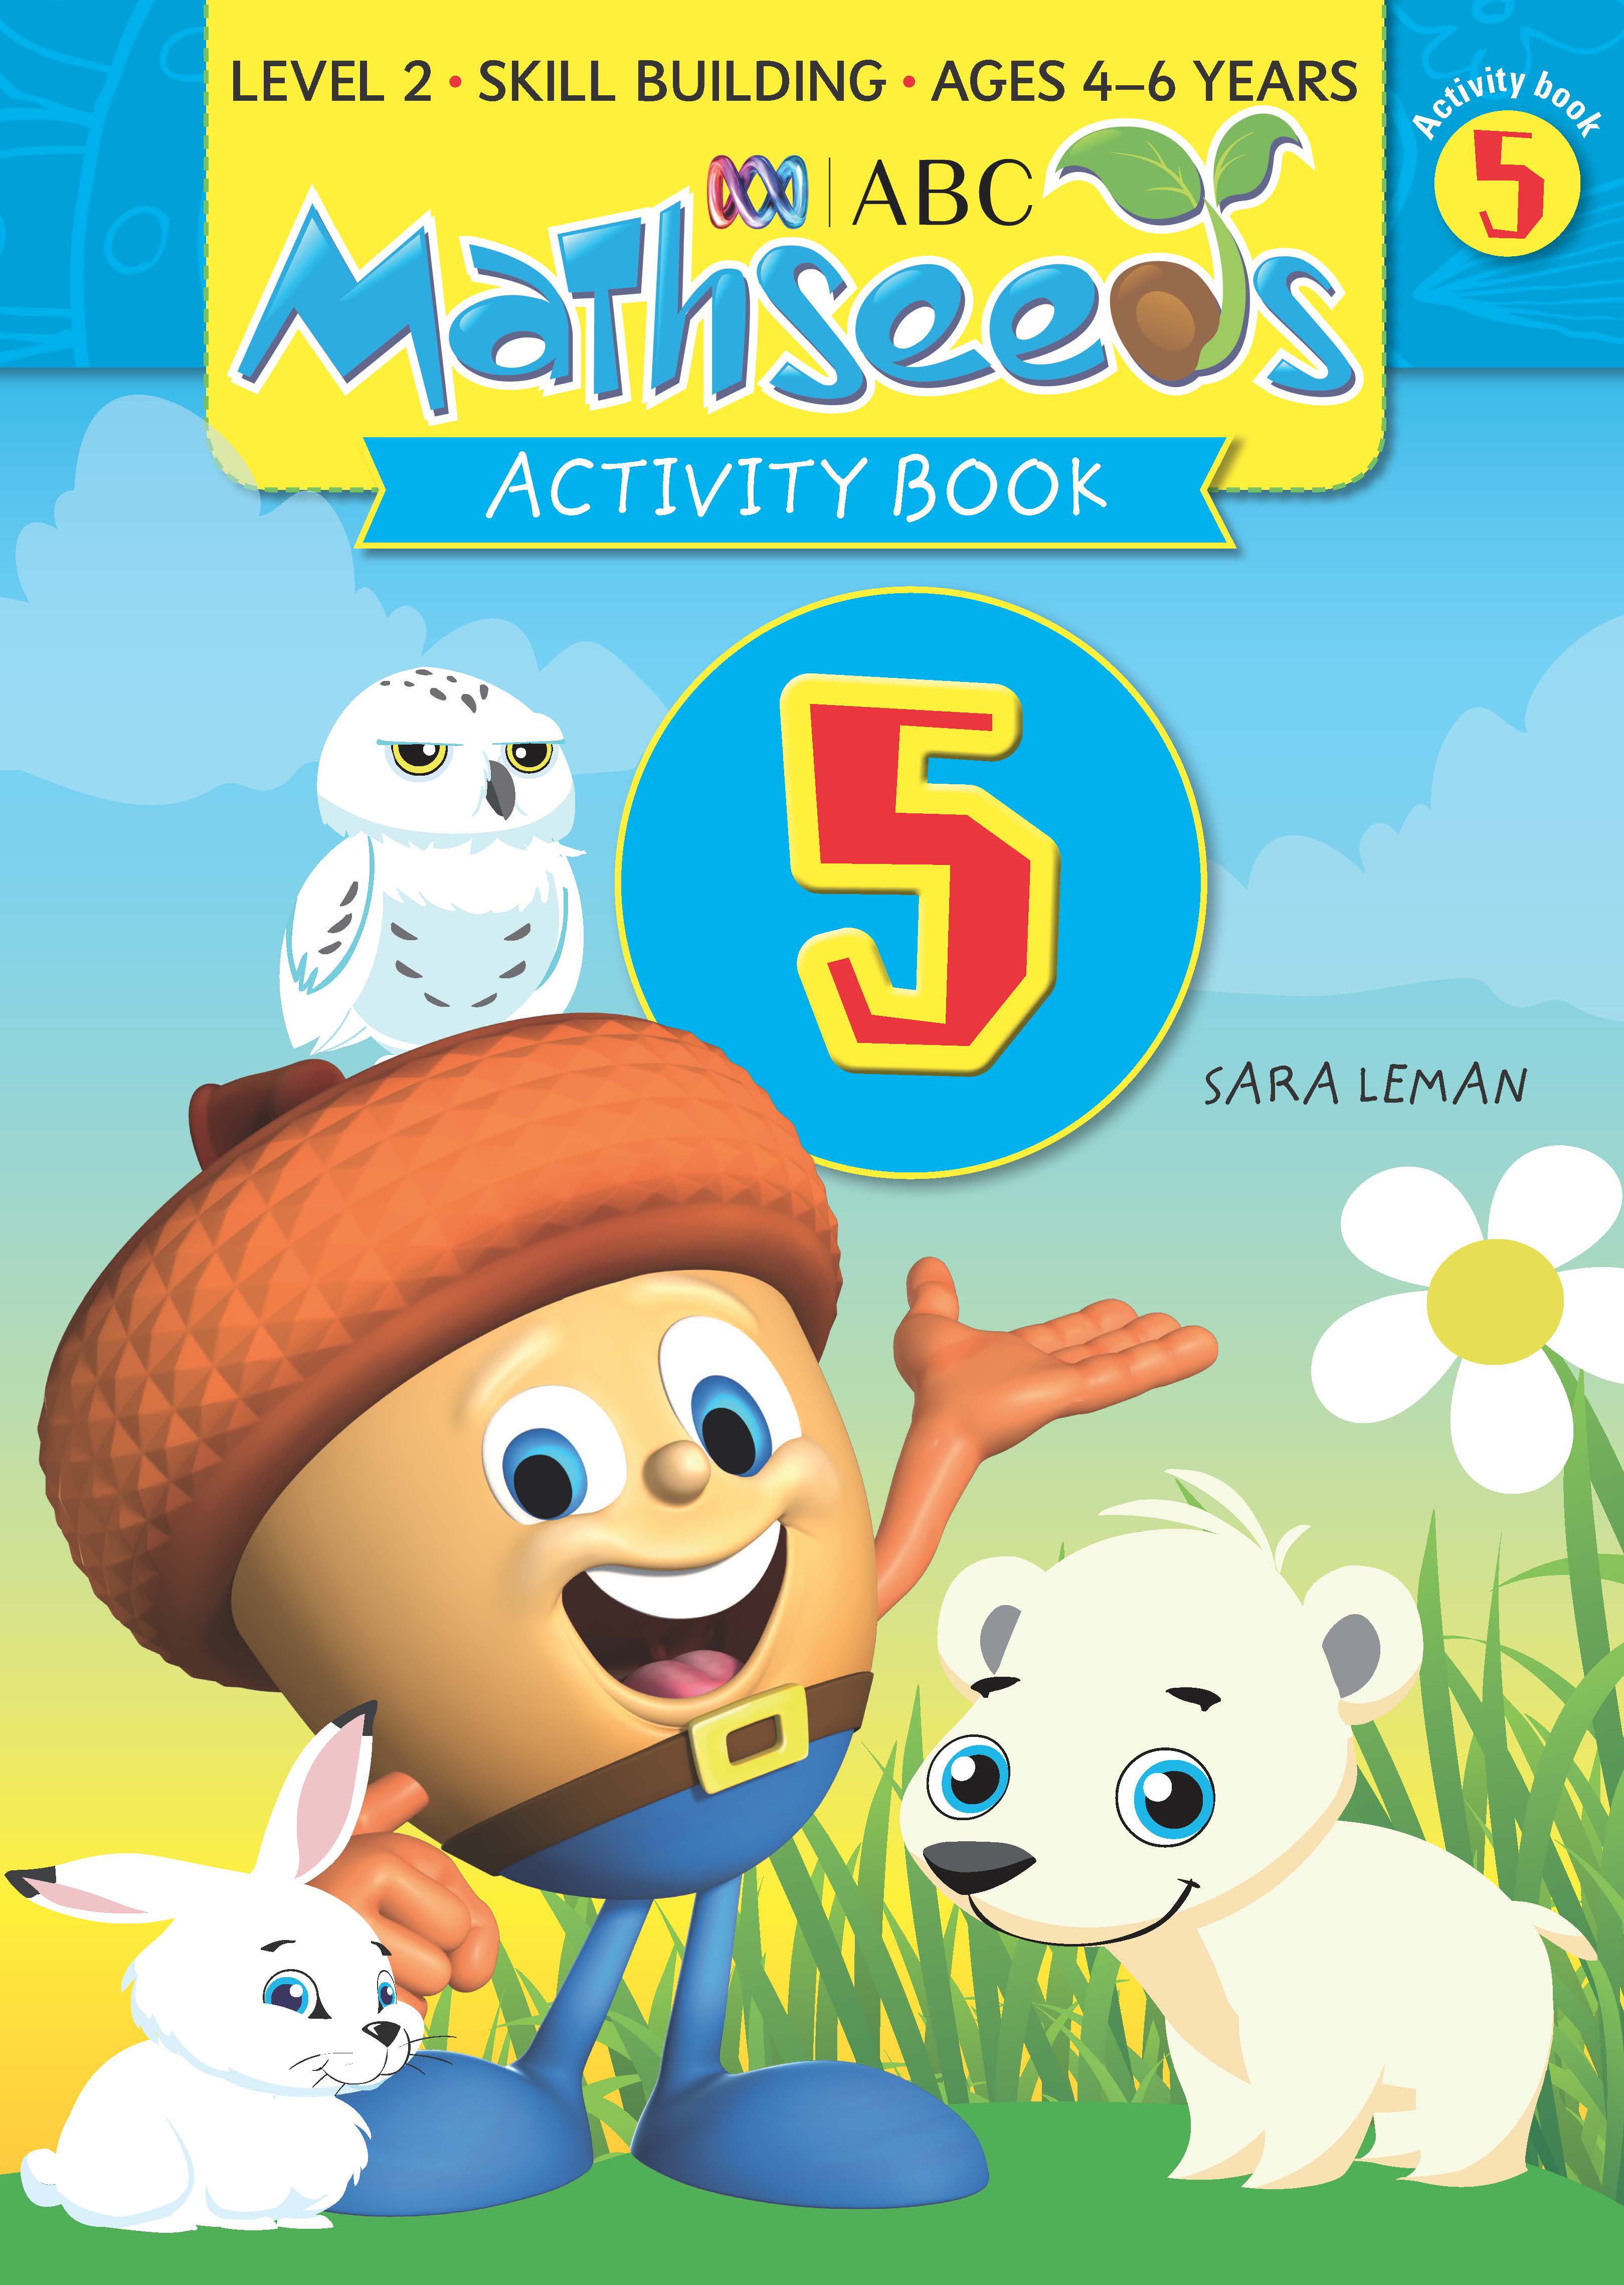 Picture of ABC Mathseeds Activity Book 5 Level 2 Ages 4-6